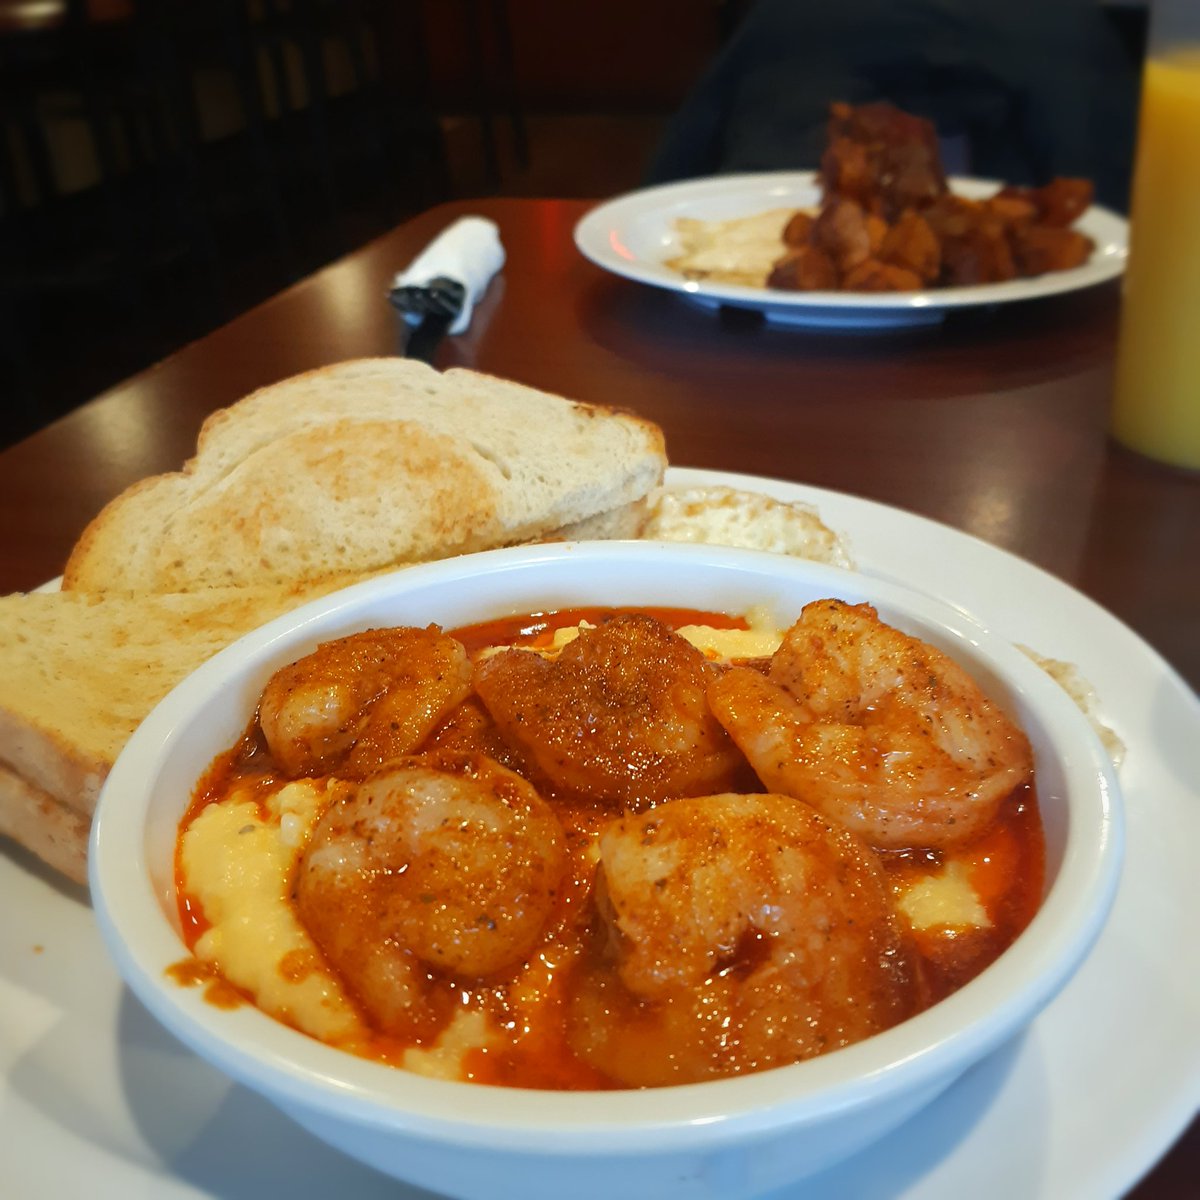 Took a cross boarder jaunt and had some delicious and  spicy cajun shrimp & grits at Hyde Park Cafe in Niagara Falls, USA #grits #shrimpandgrits #cheesegrits #hydeparkcafe #NiagaraFallsUSA #cajunshrimp